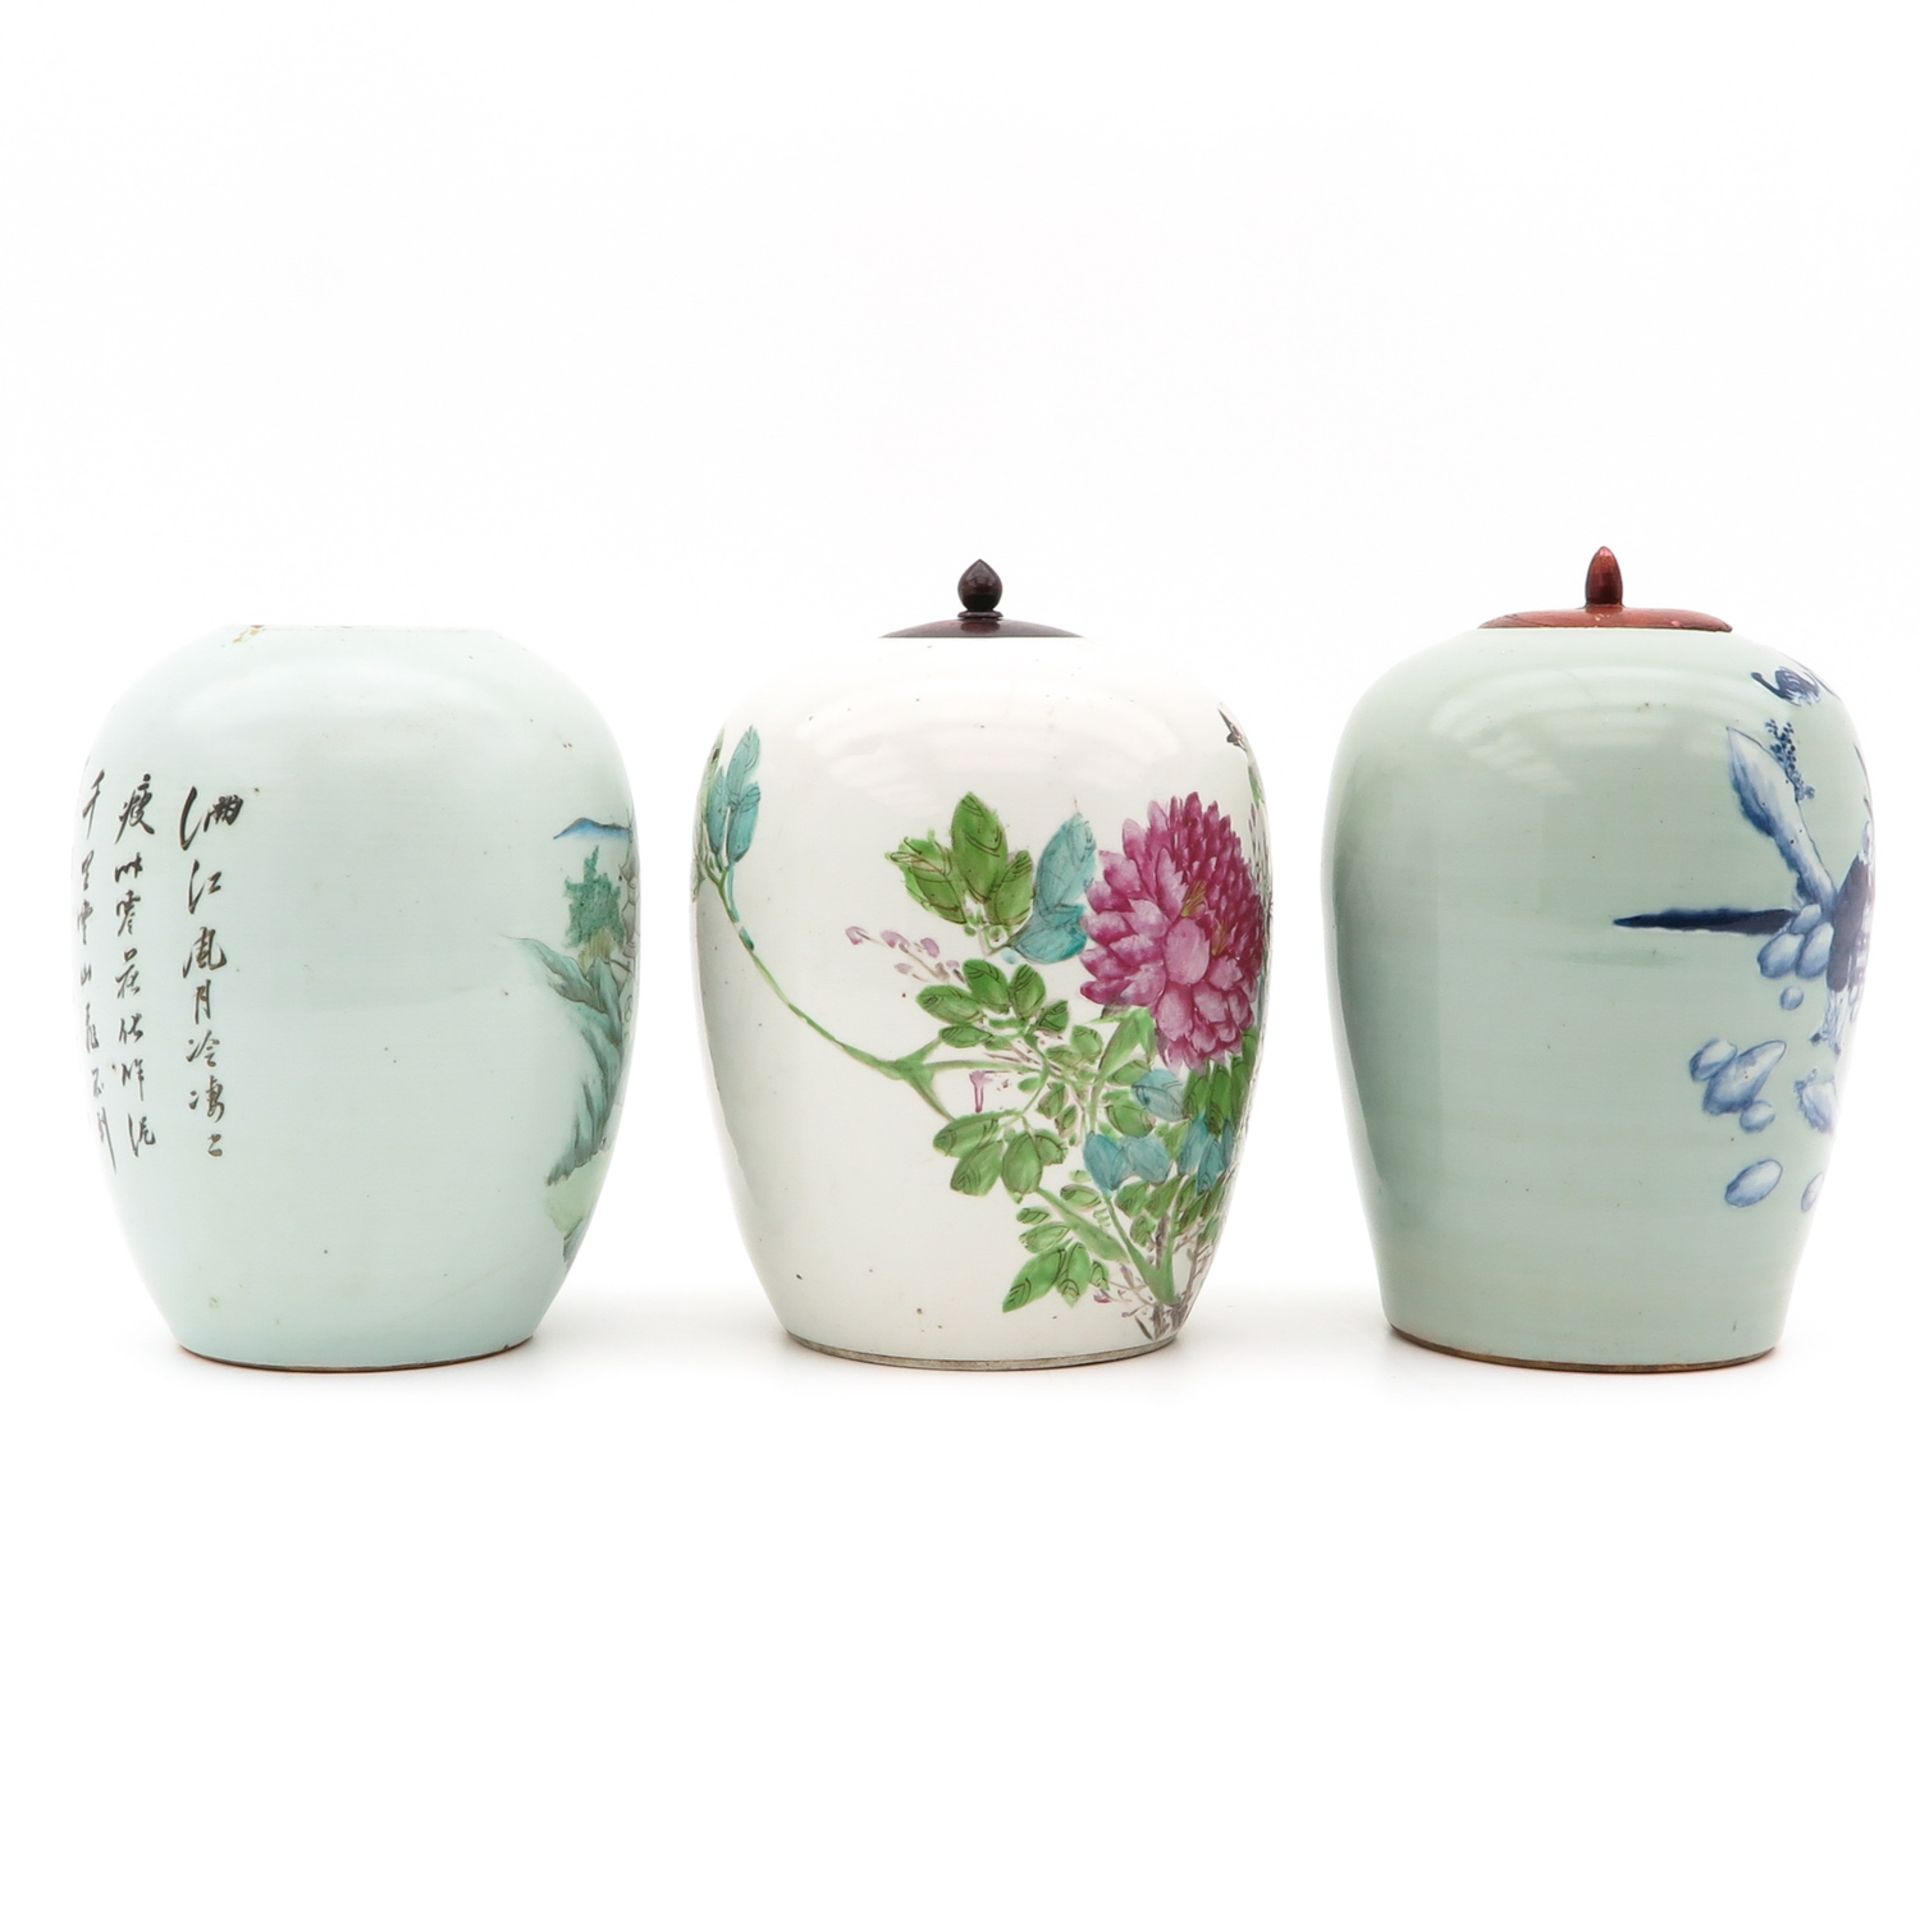 A Collection of 3 Ginger Jars - Image 4 of 10